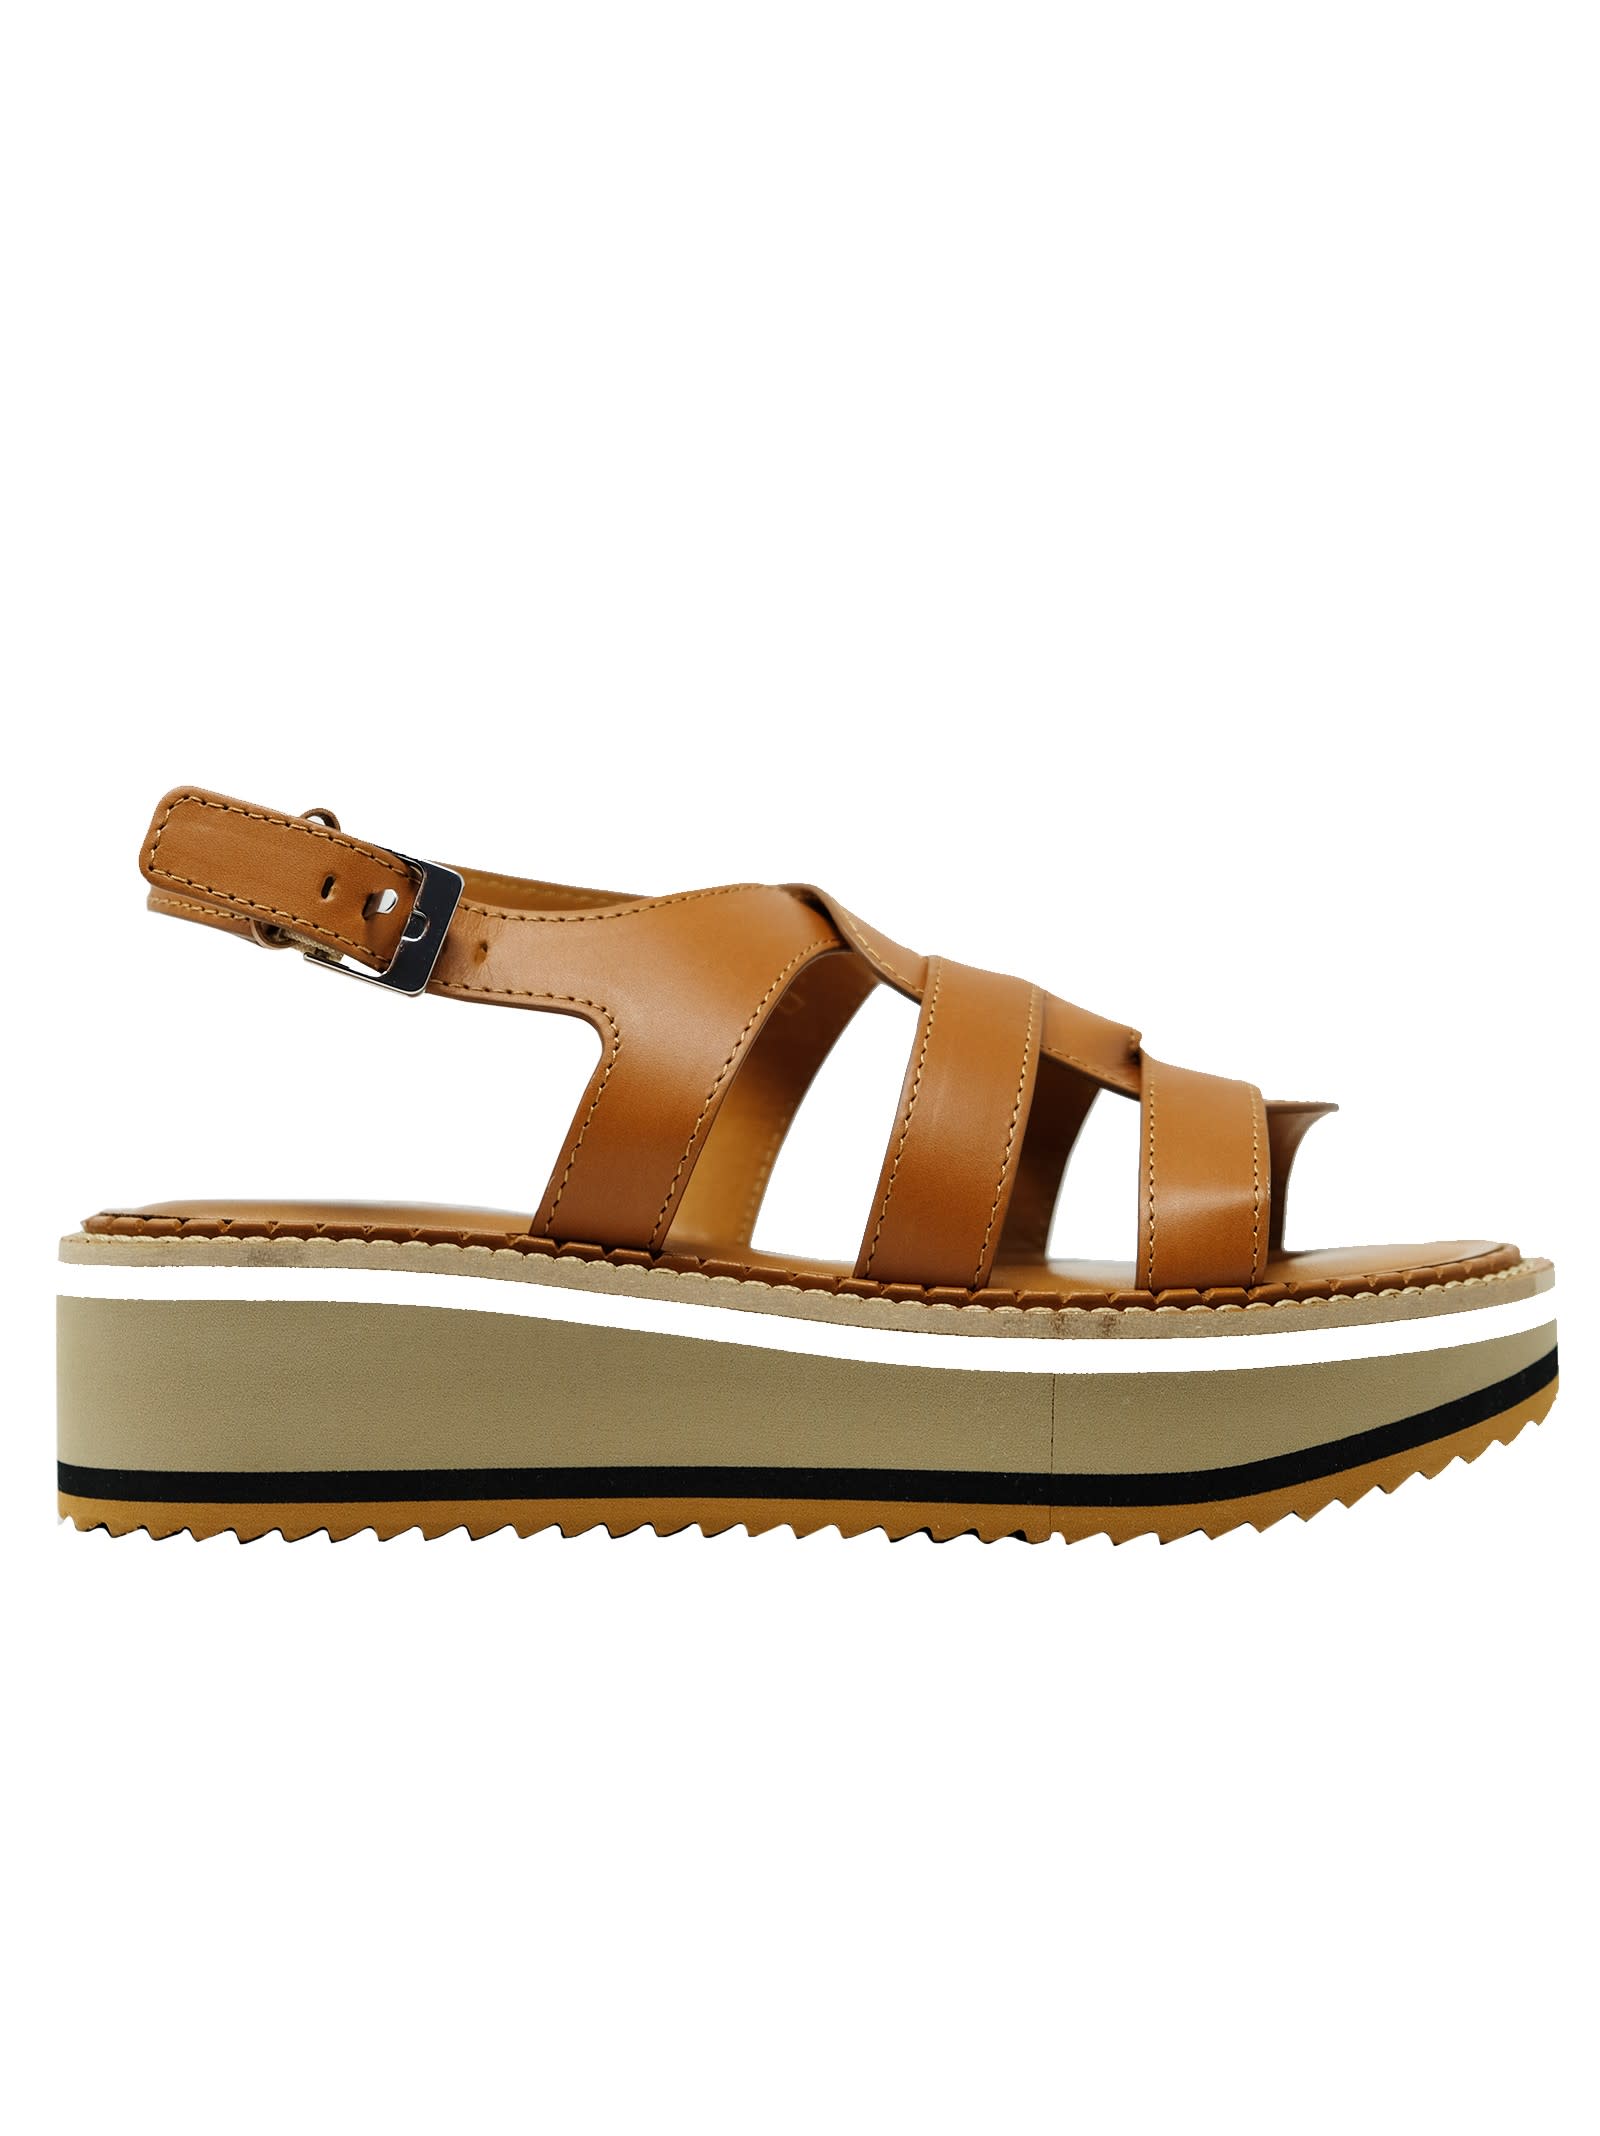 Robert Clergerie Tan Leather Sandals